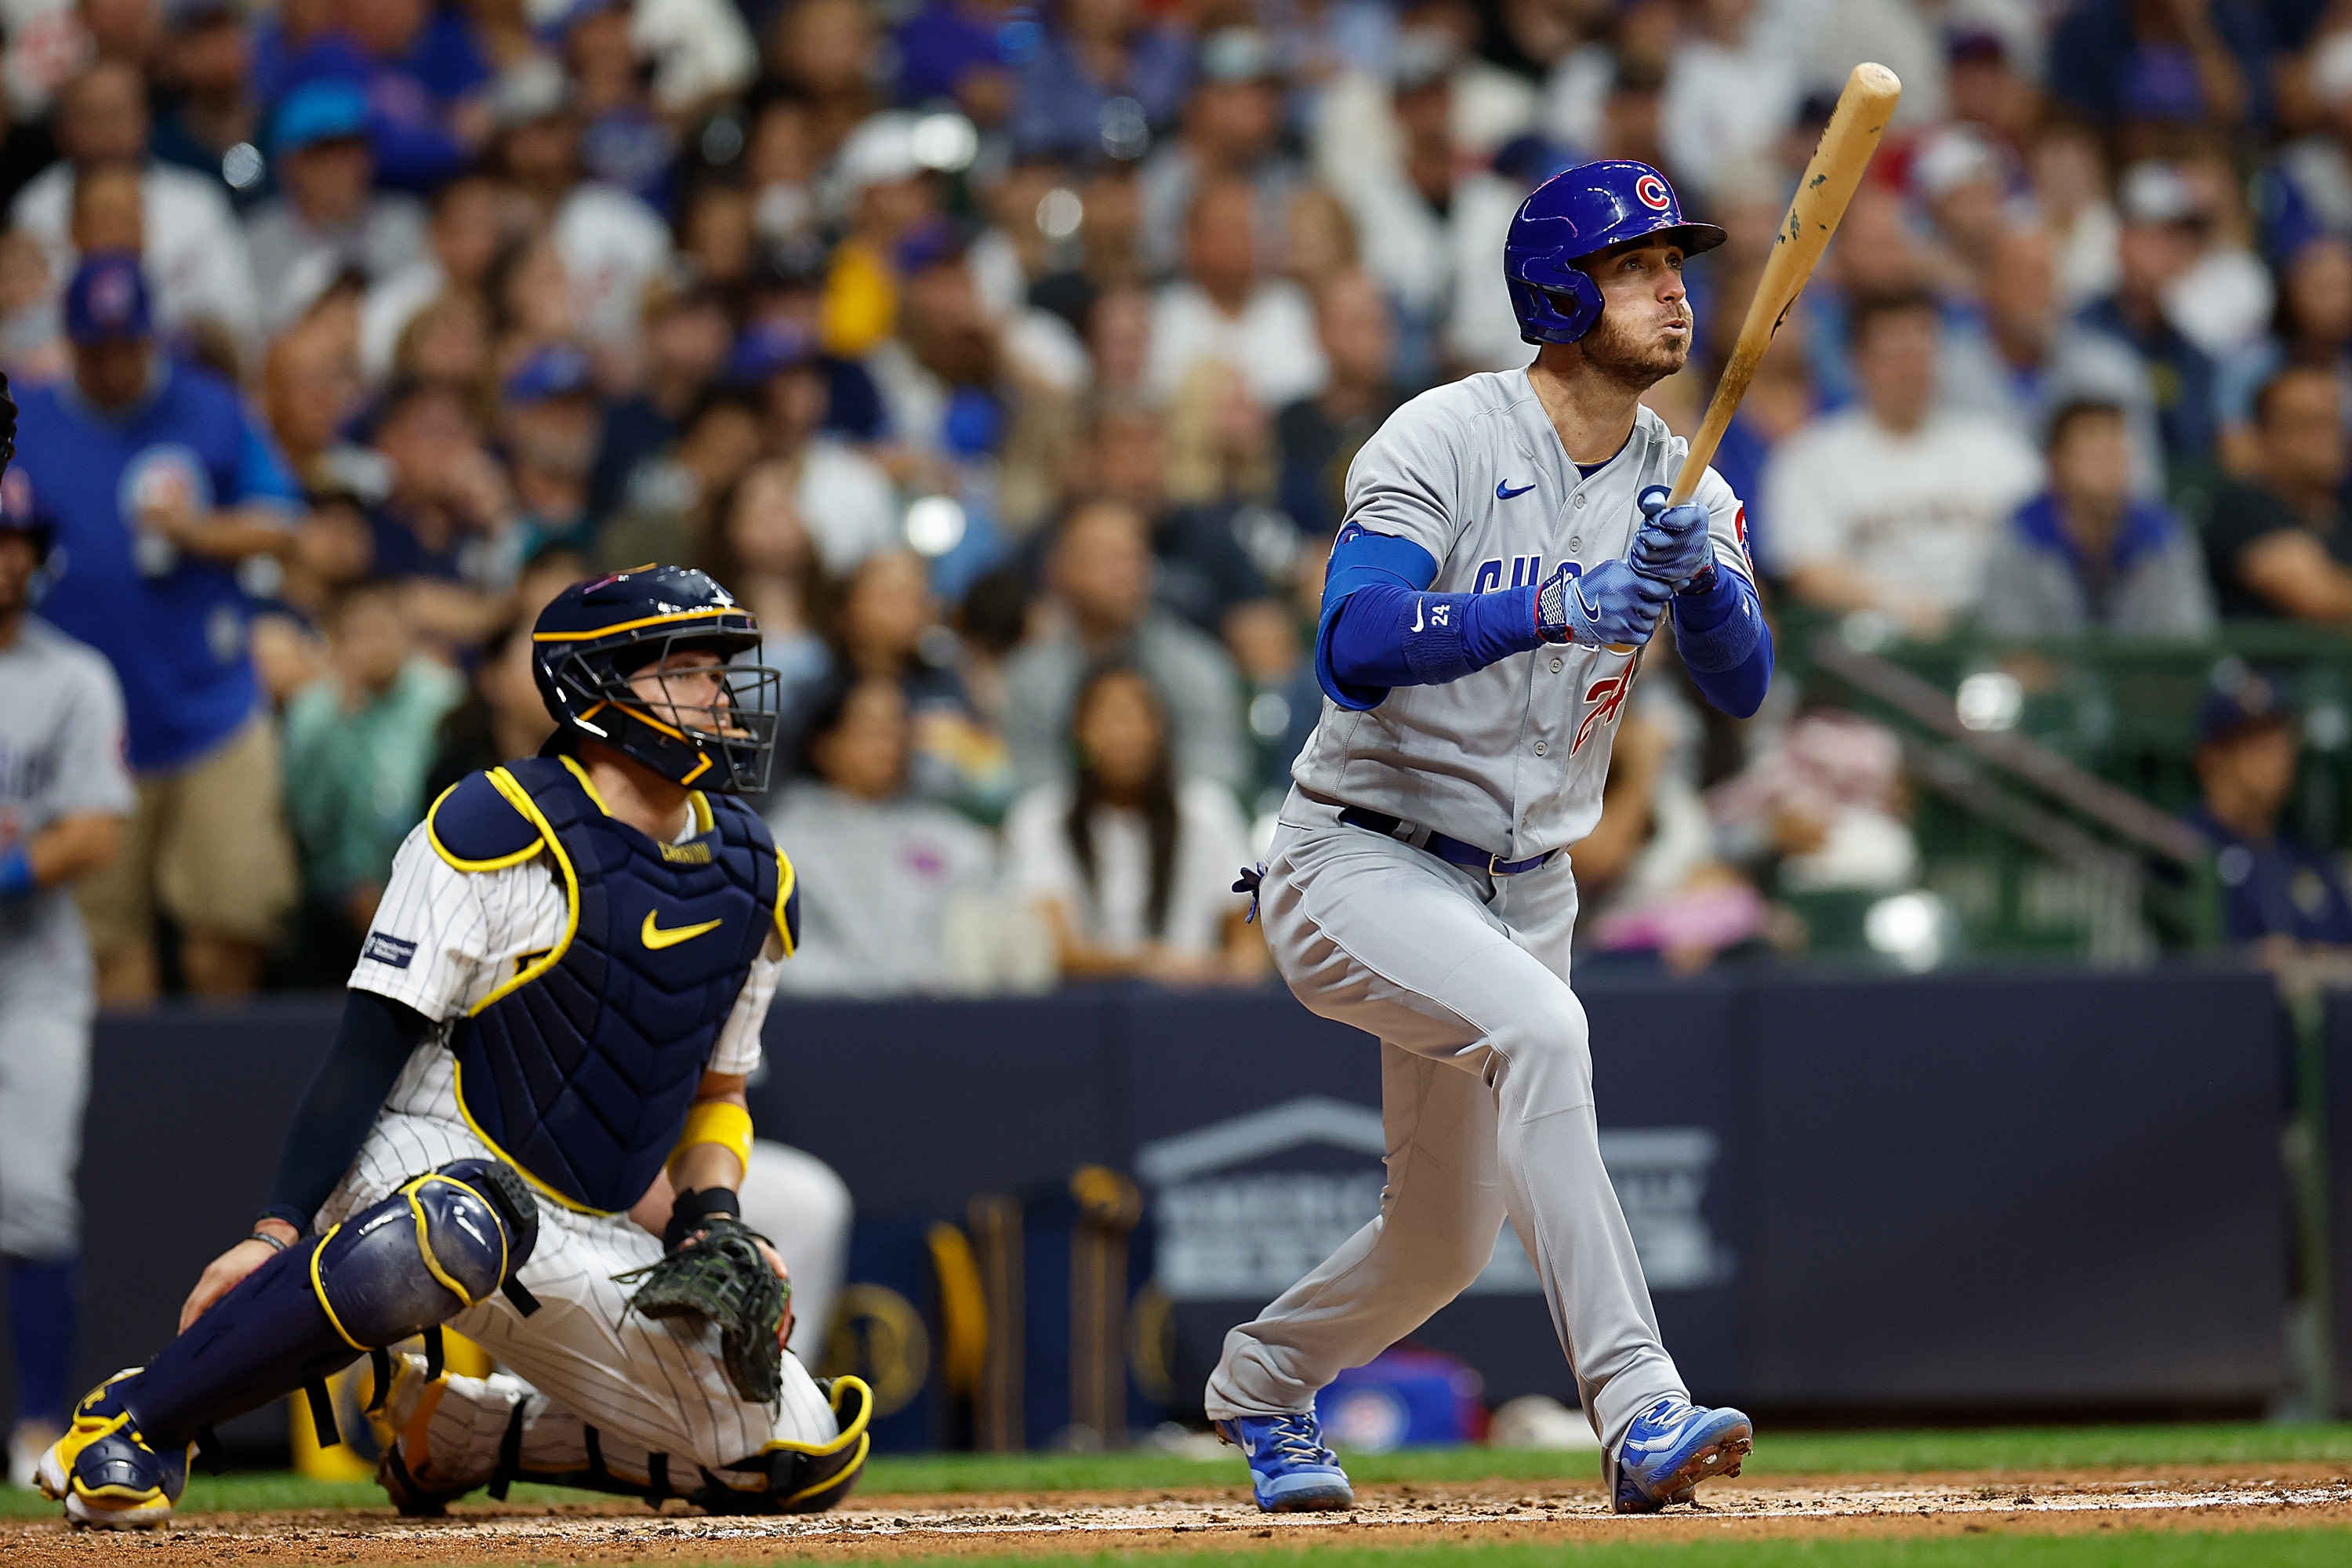 Parkland's Anthony Rizzo Ties Career High in Home Runs; Reaches Playoffs  for 7th Time – Parkland Talk